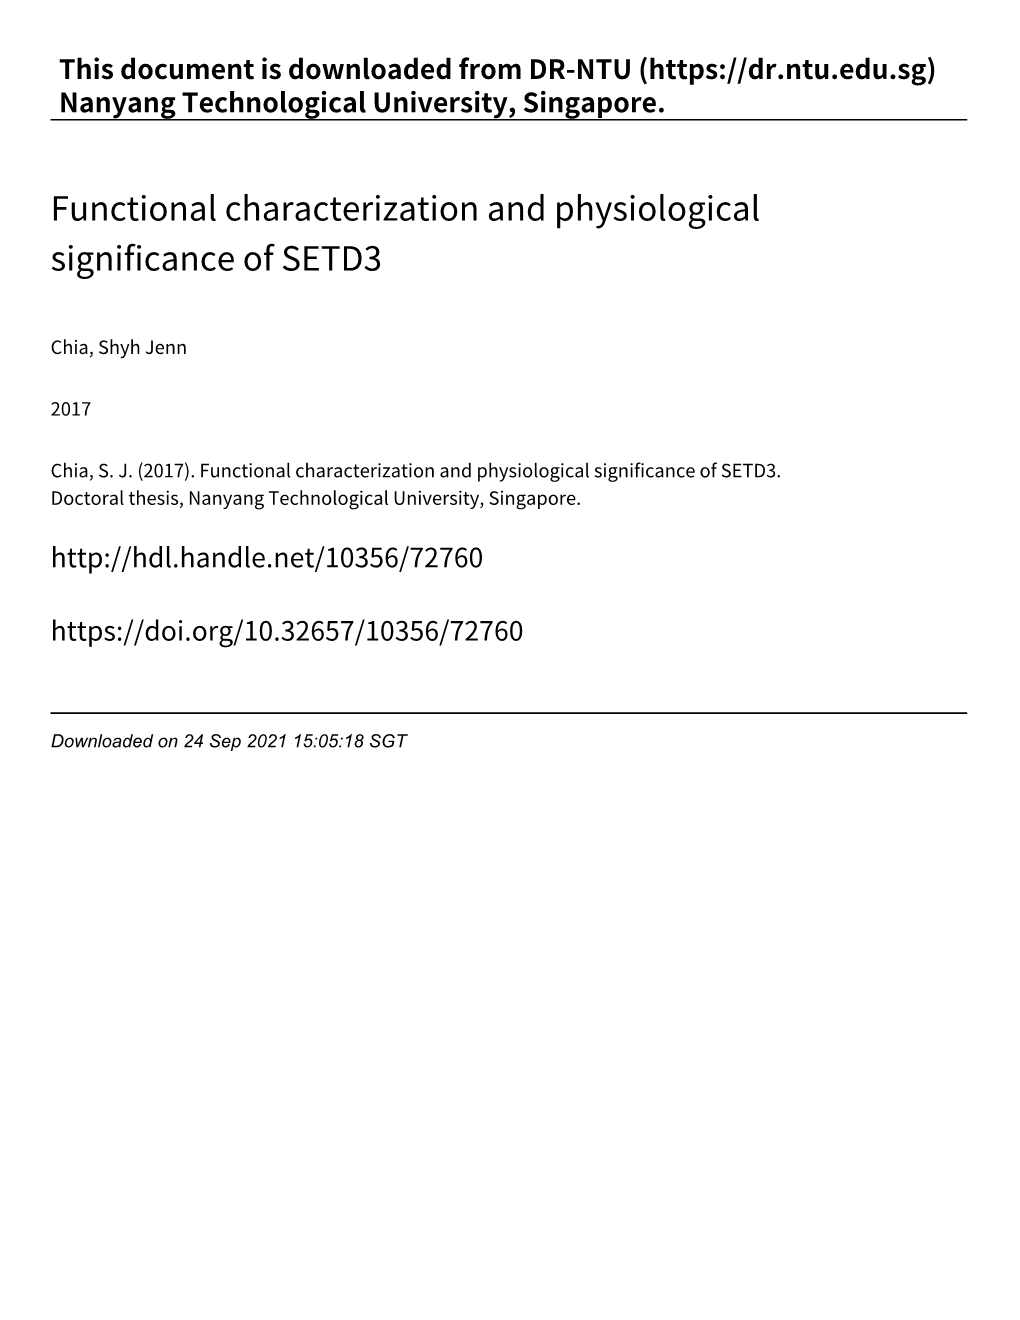 Functional Characterization and Physiological Significance of SETD3